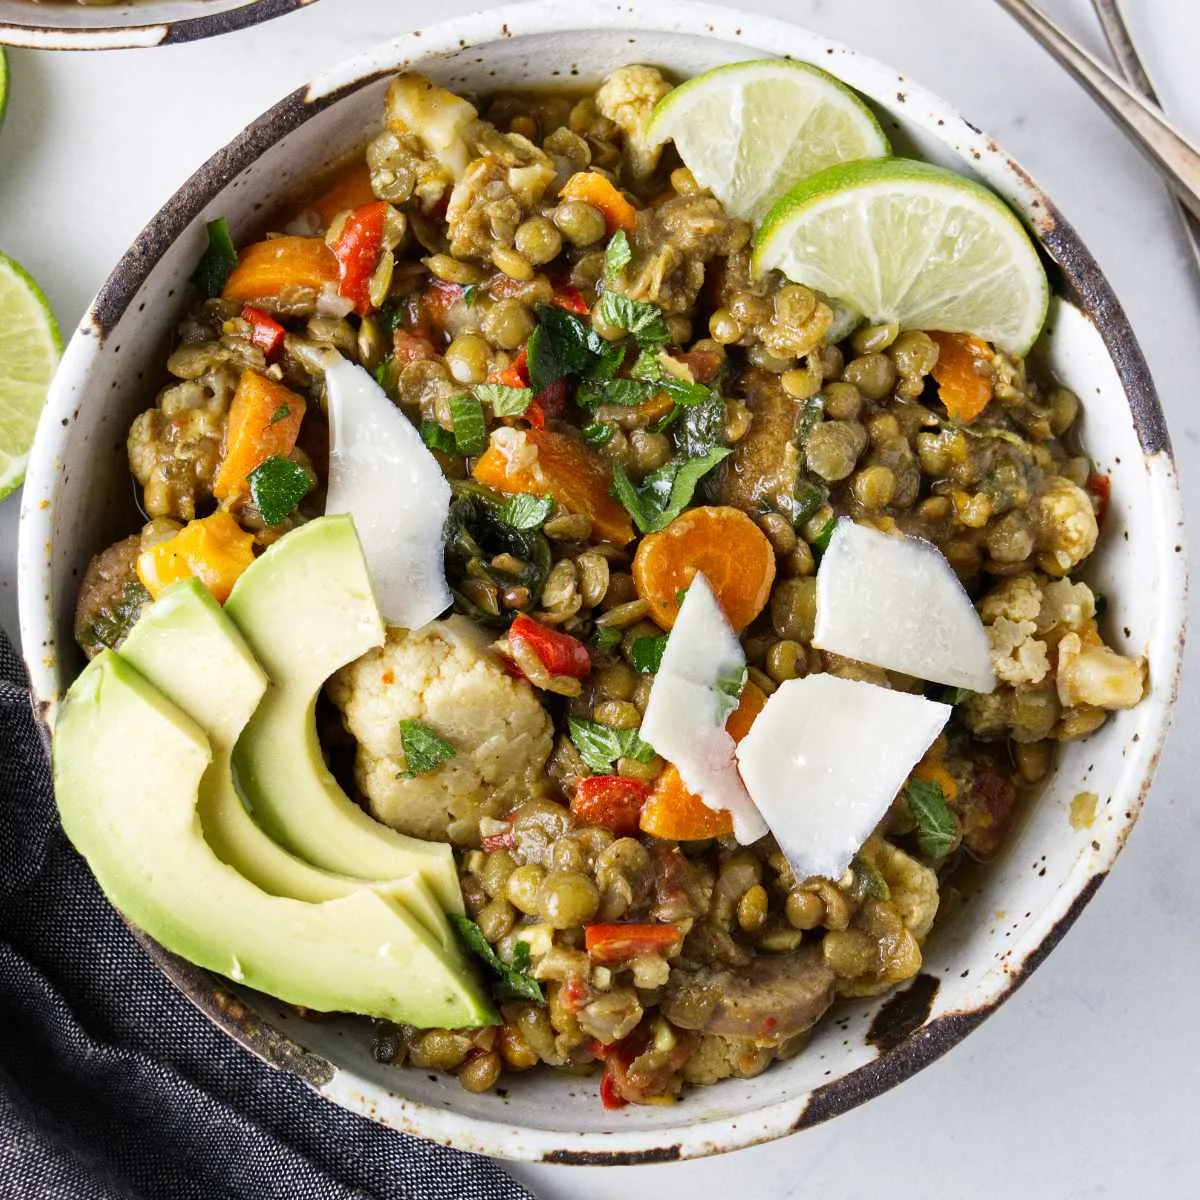 A bowl of lentil stew topped with slices of lime and avocado.